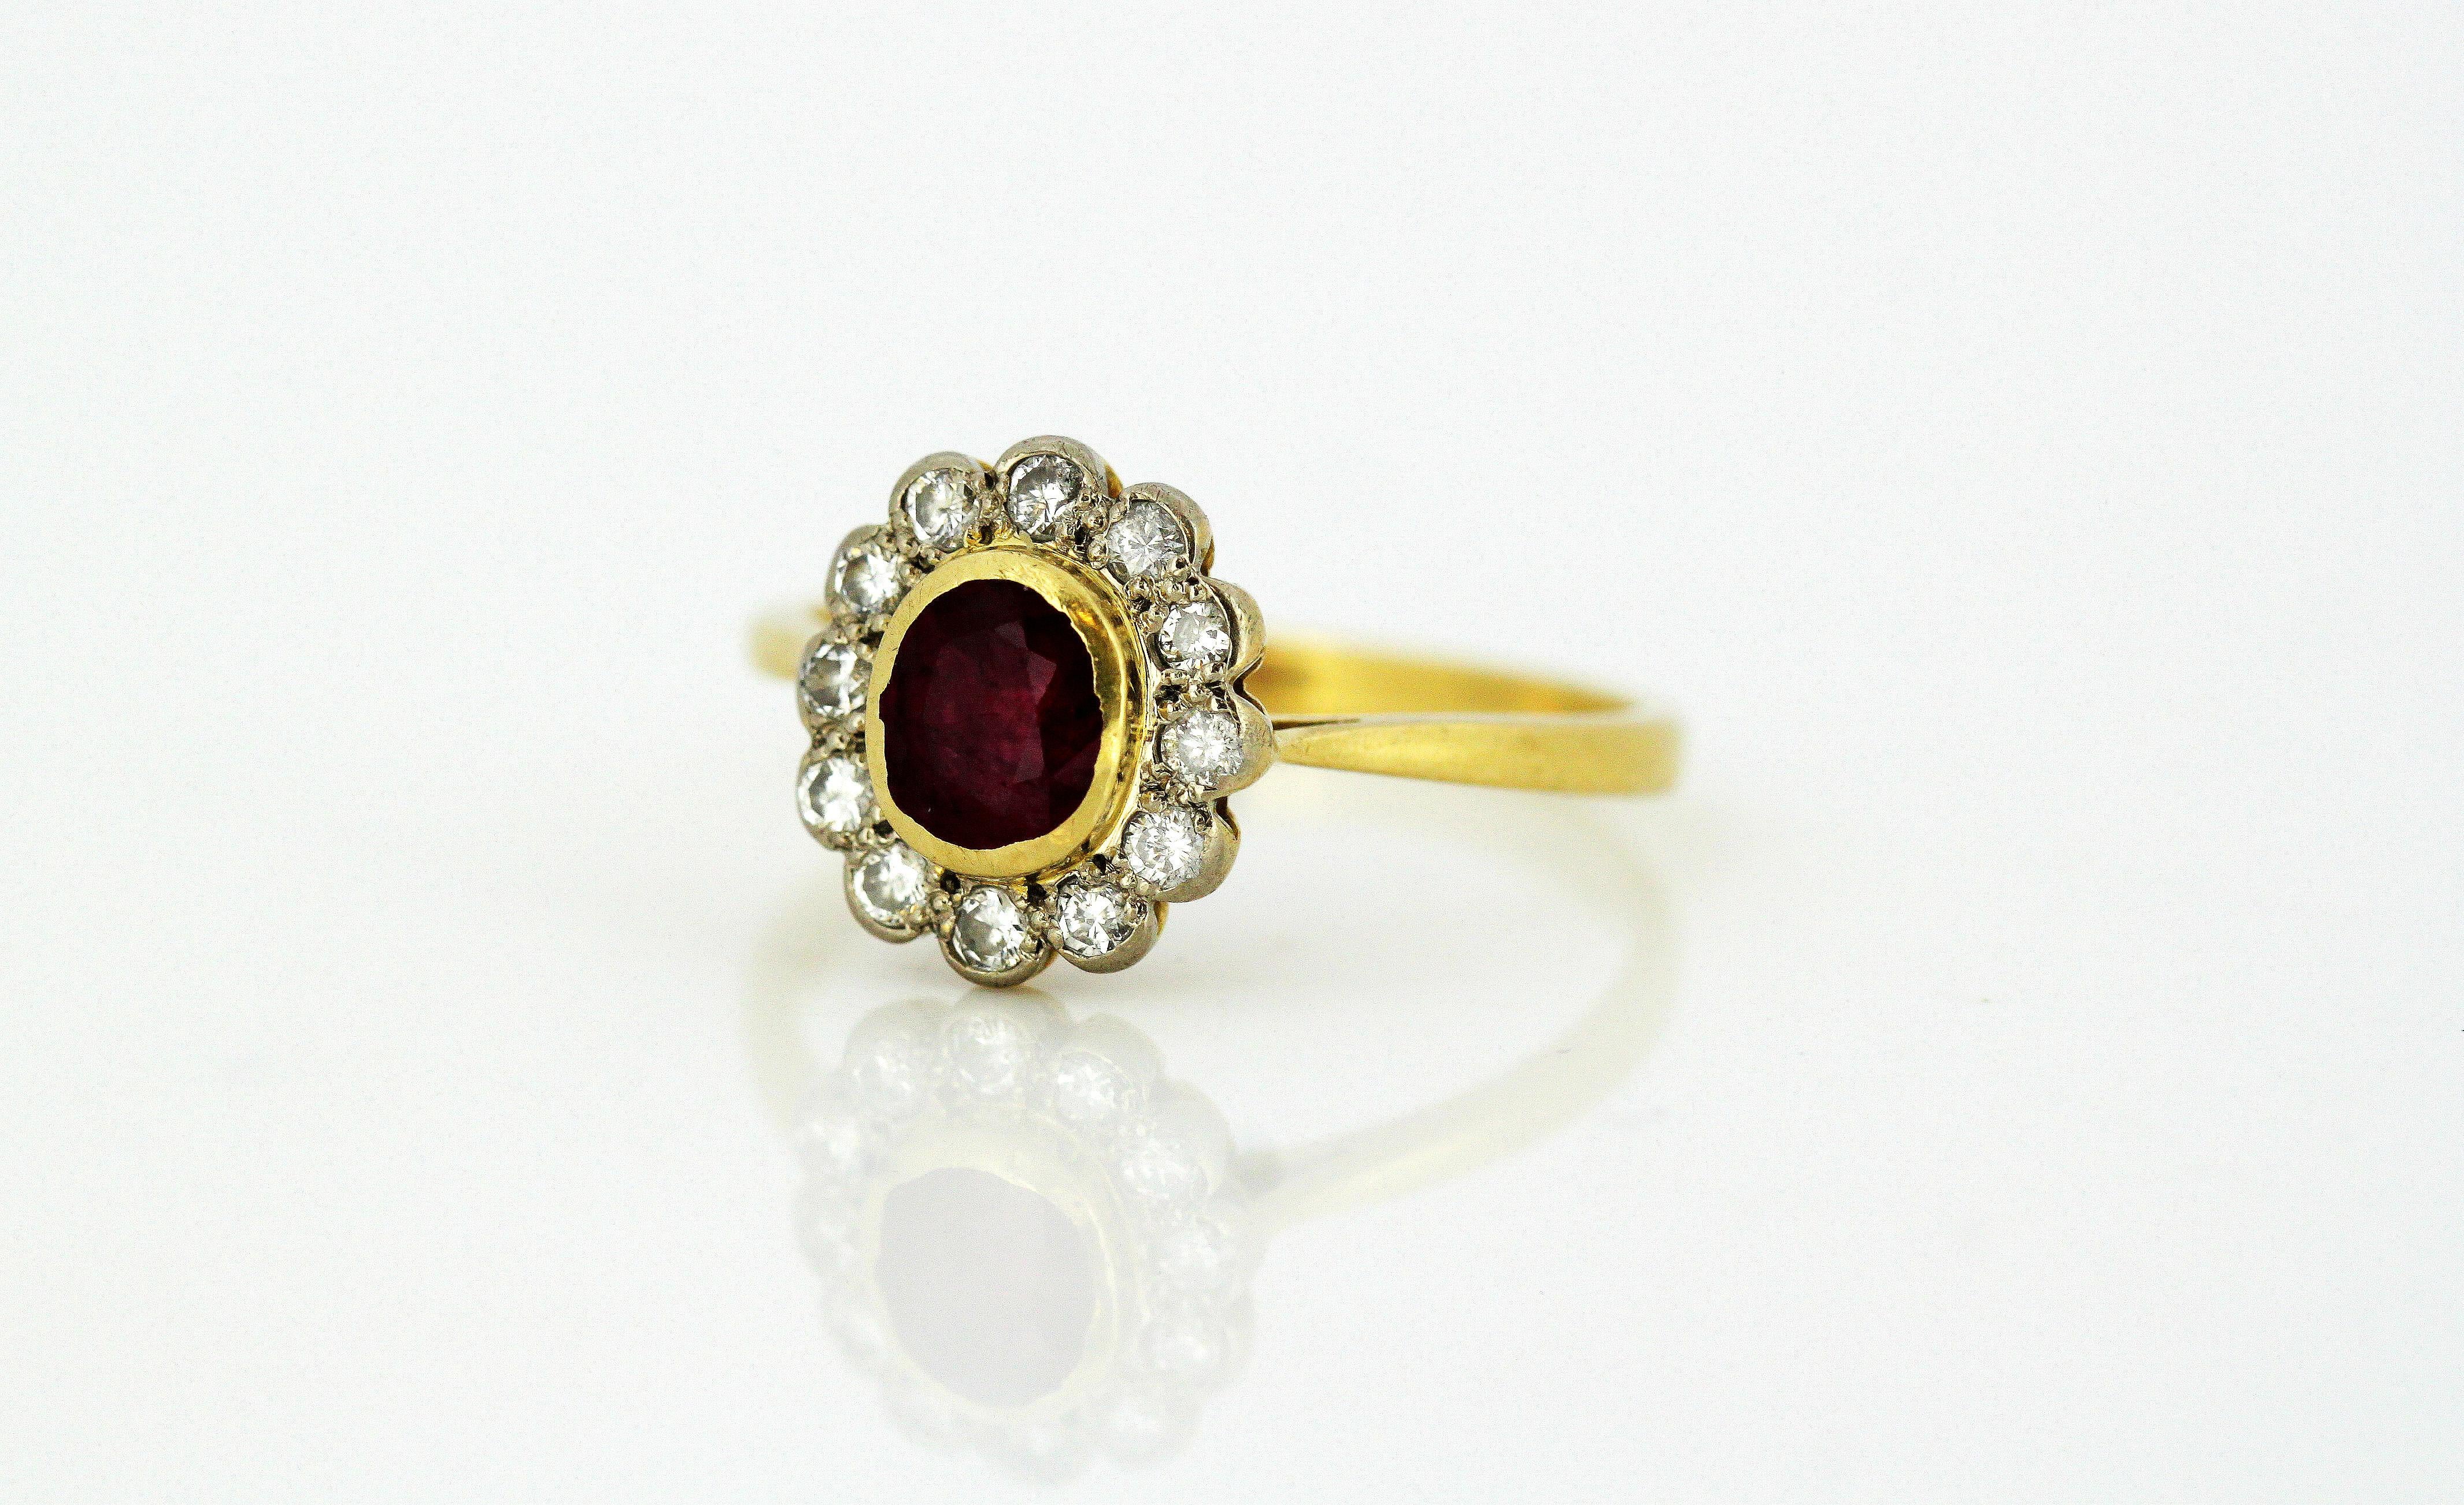 Vintage 18kt yellow gold ladies ring with natural ruby and diamonds.
Made in London 1985
Makers Mark : KC
Fully hallmarked 18kt gold.

Dimensions -
Finger Size : (UK) = P (US) = 8 (EU) = 56 1/4
Ring Size : 2.4 x 2.1 x 1.2 cm
Weight: 3 grams